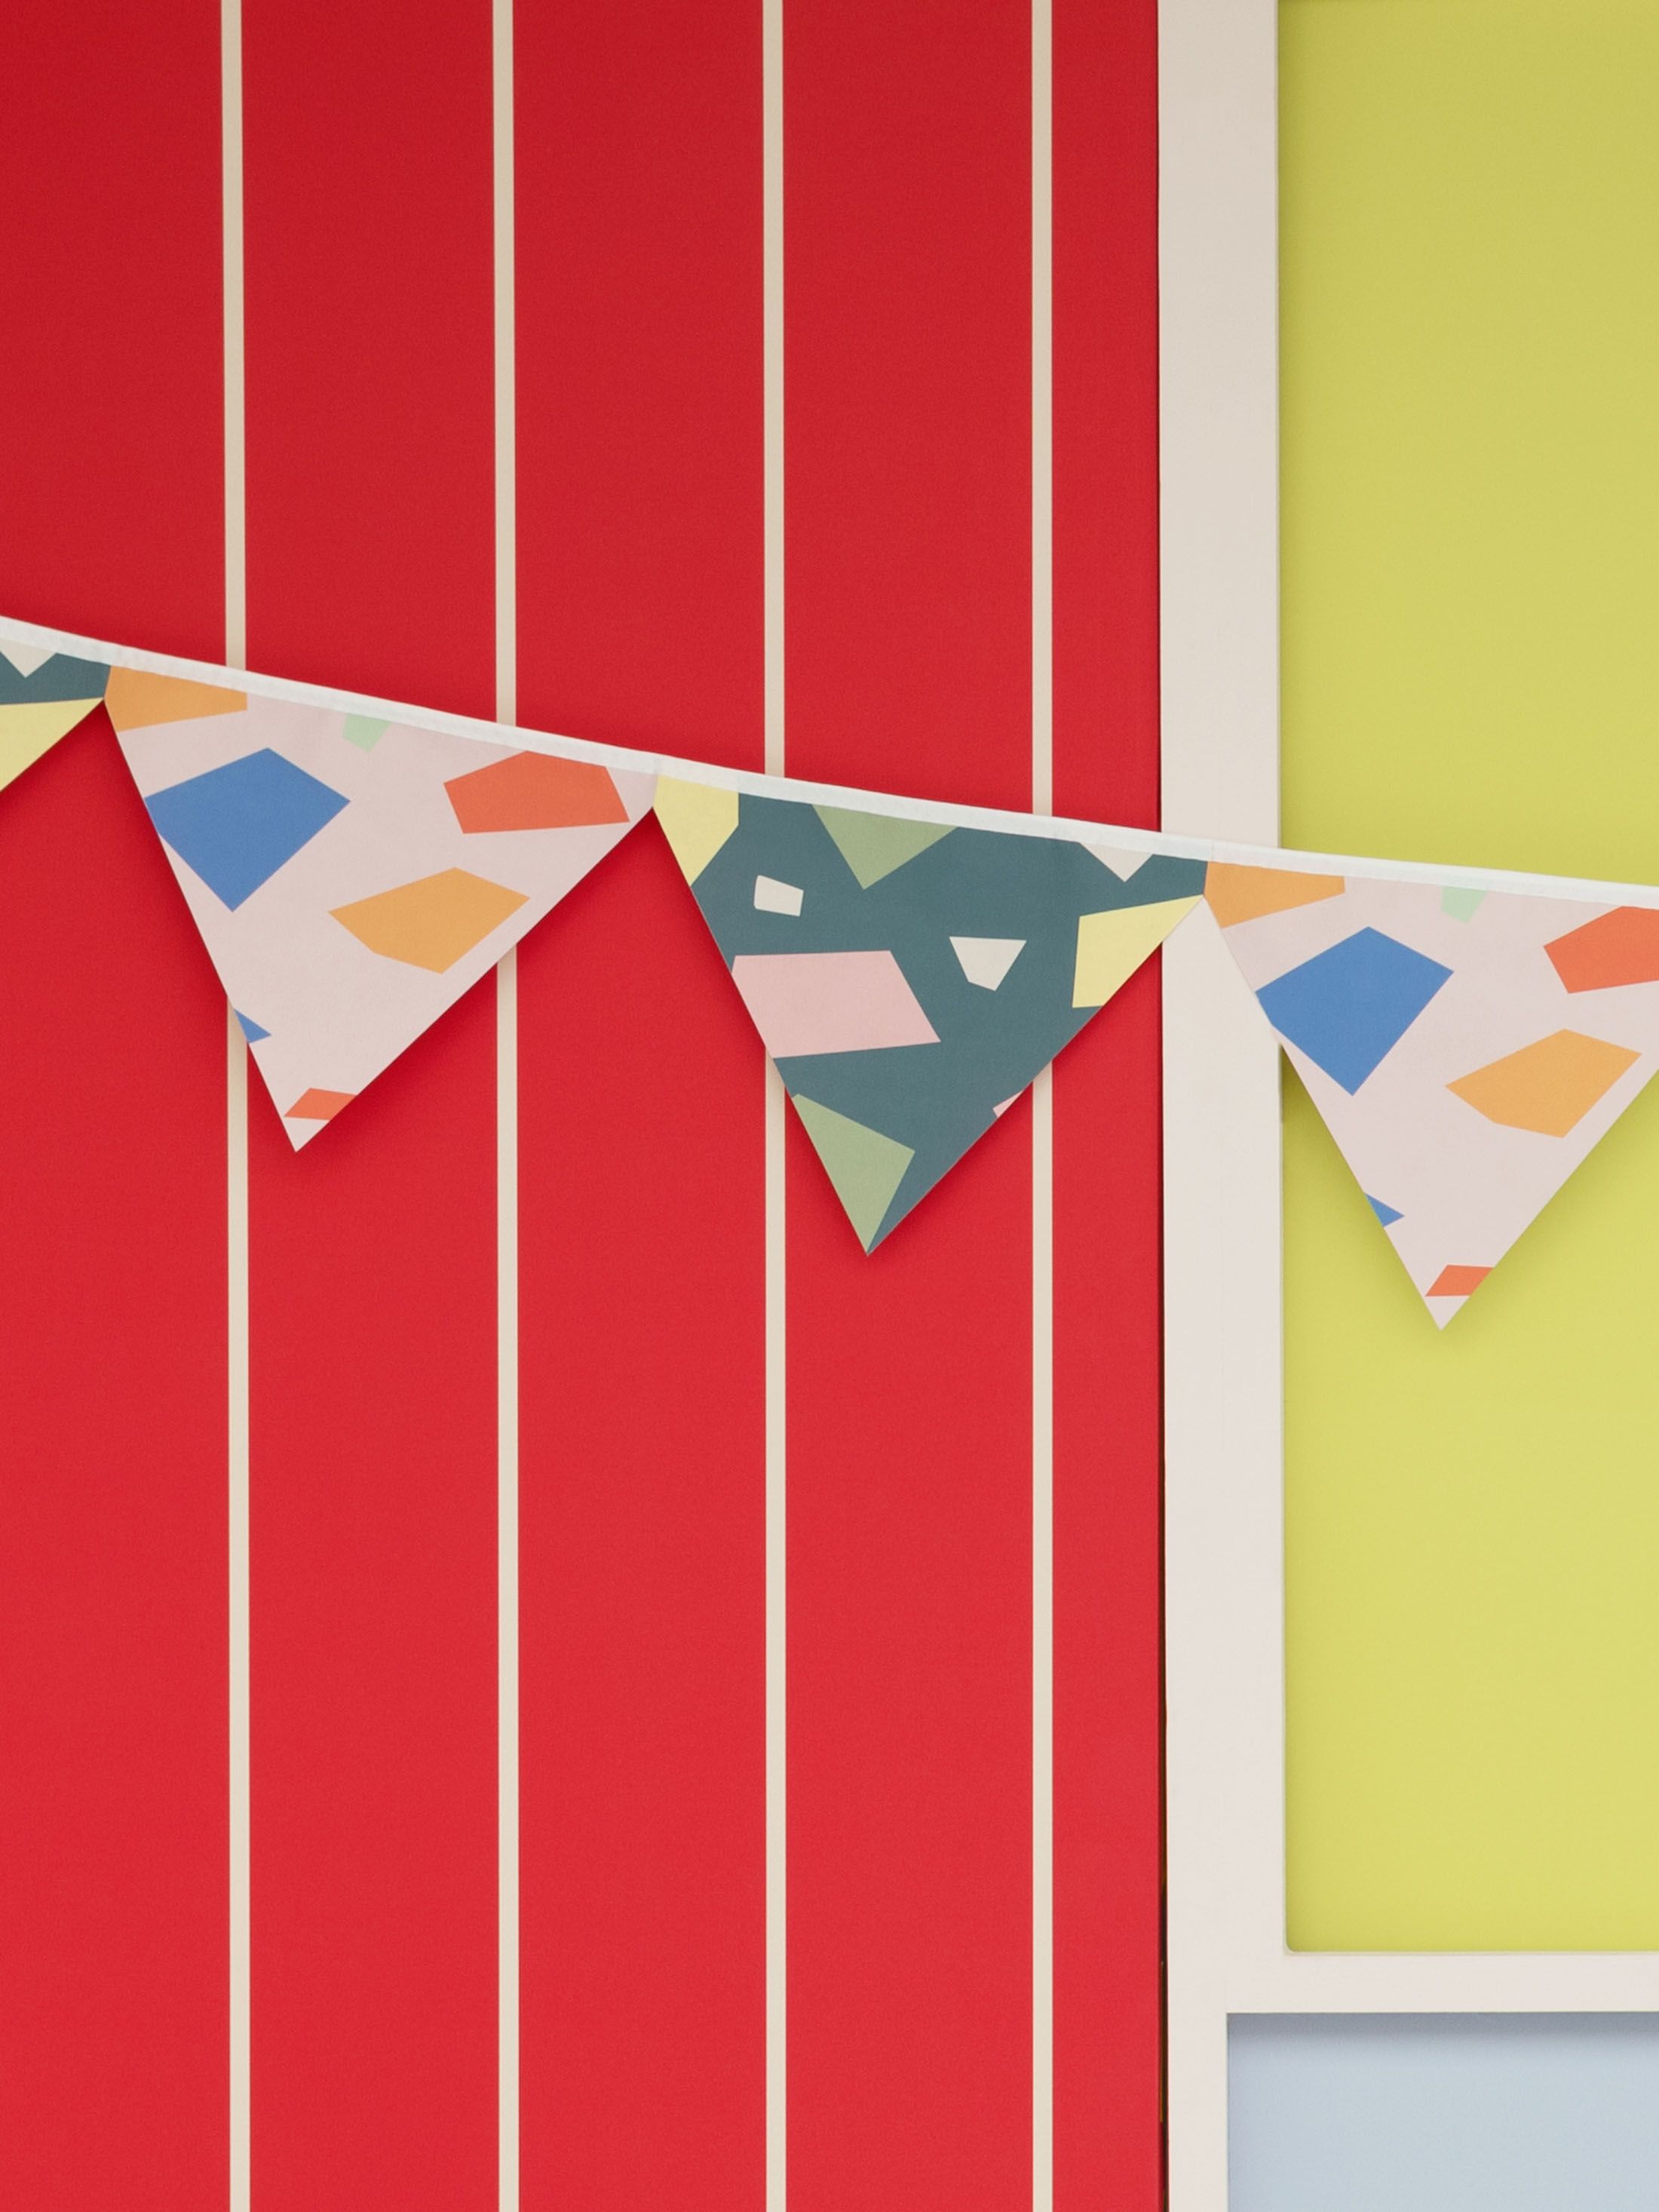 bespoke bunting made and printed to order